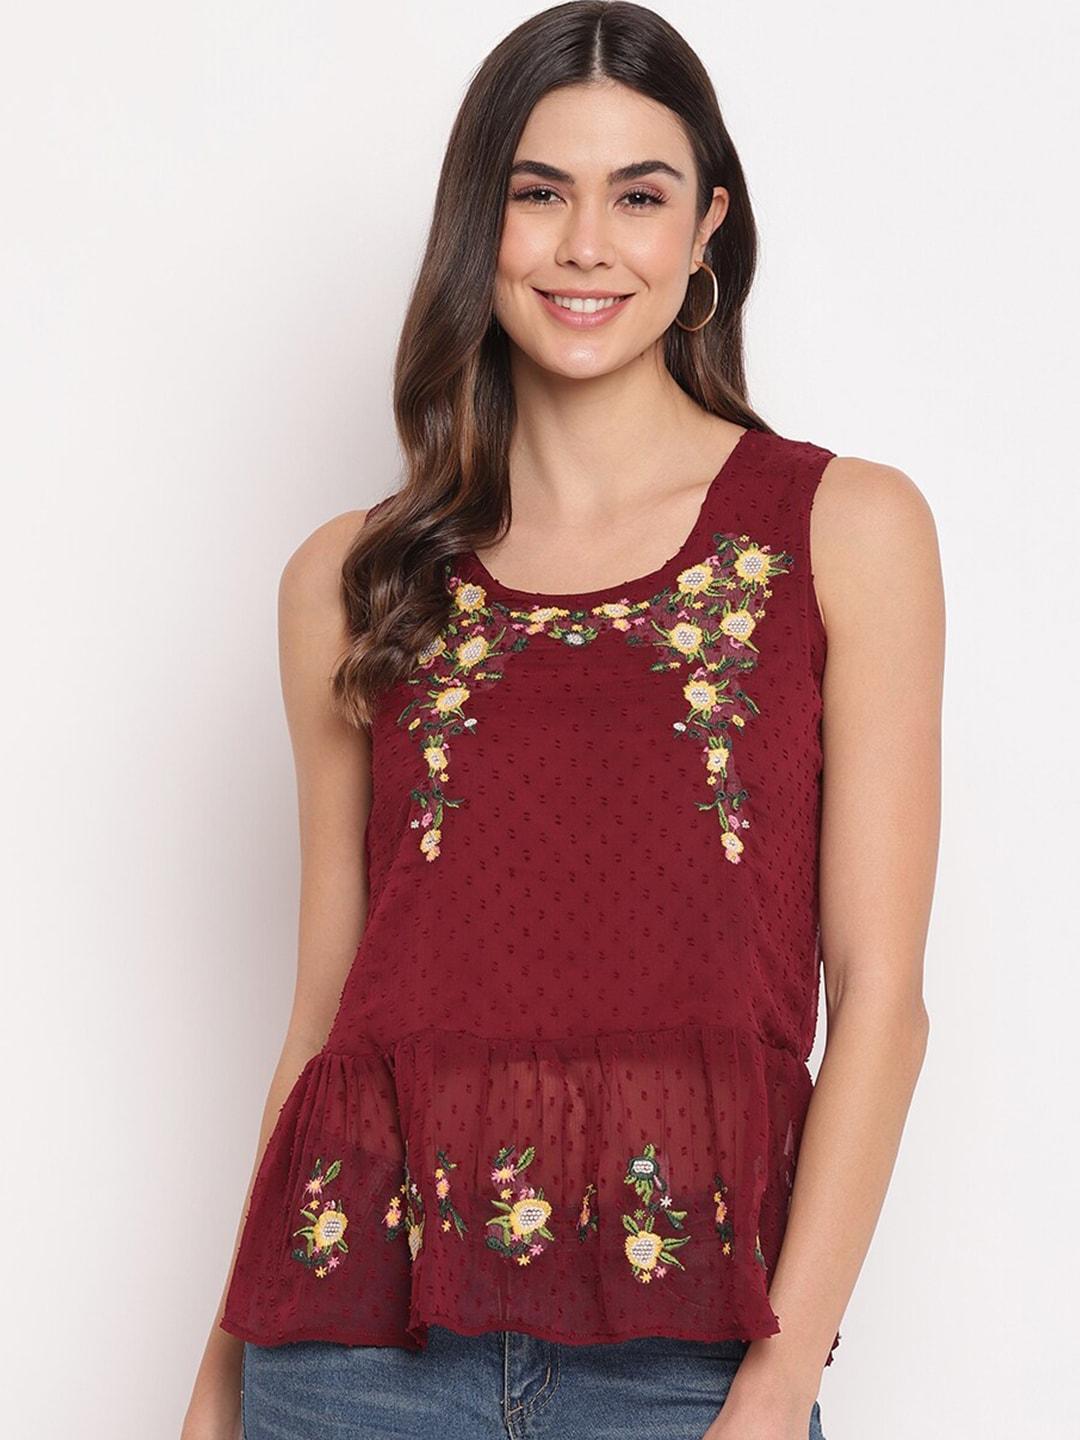 mayra-women-maroon-floral-embroidered-top